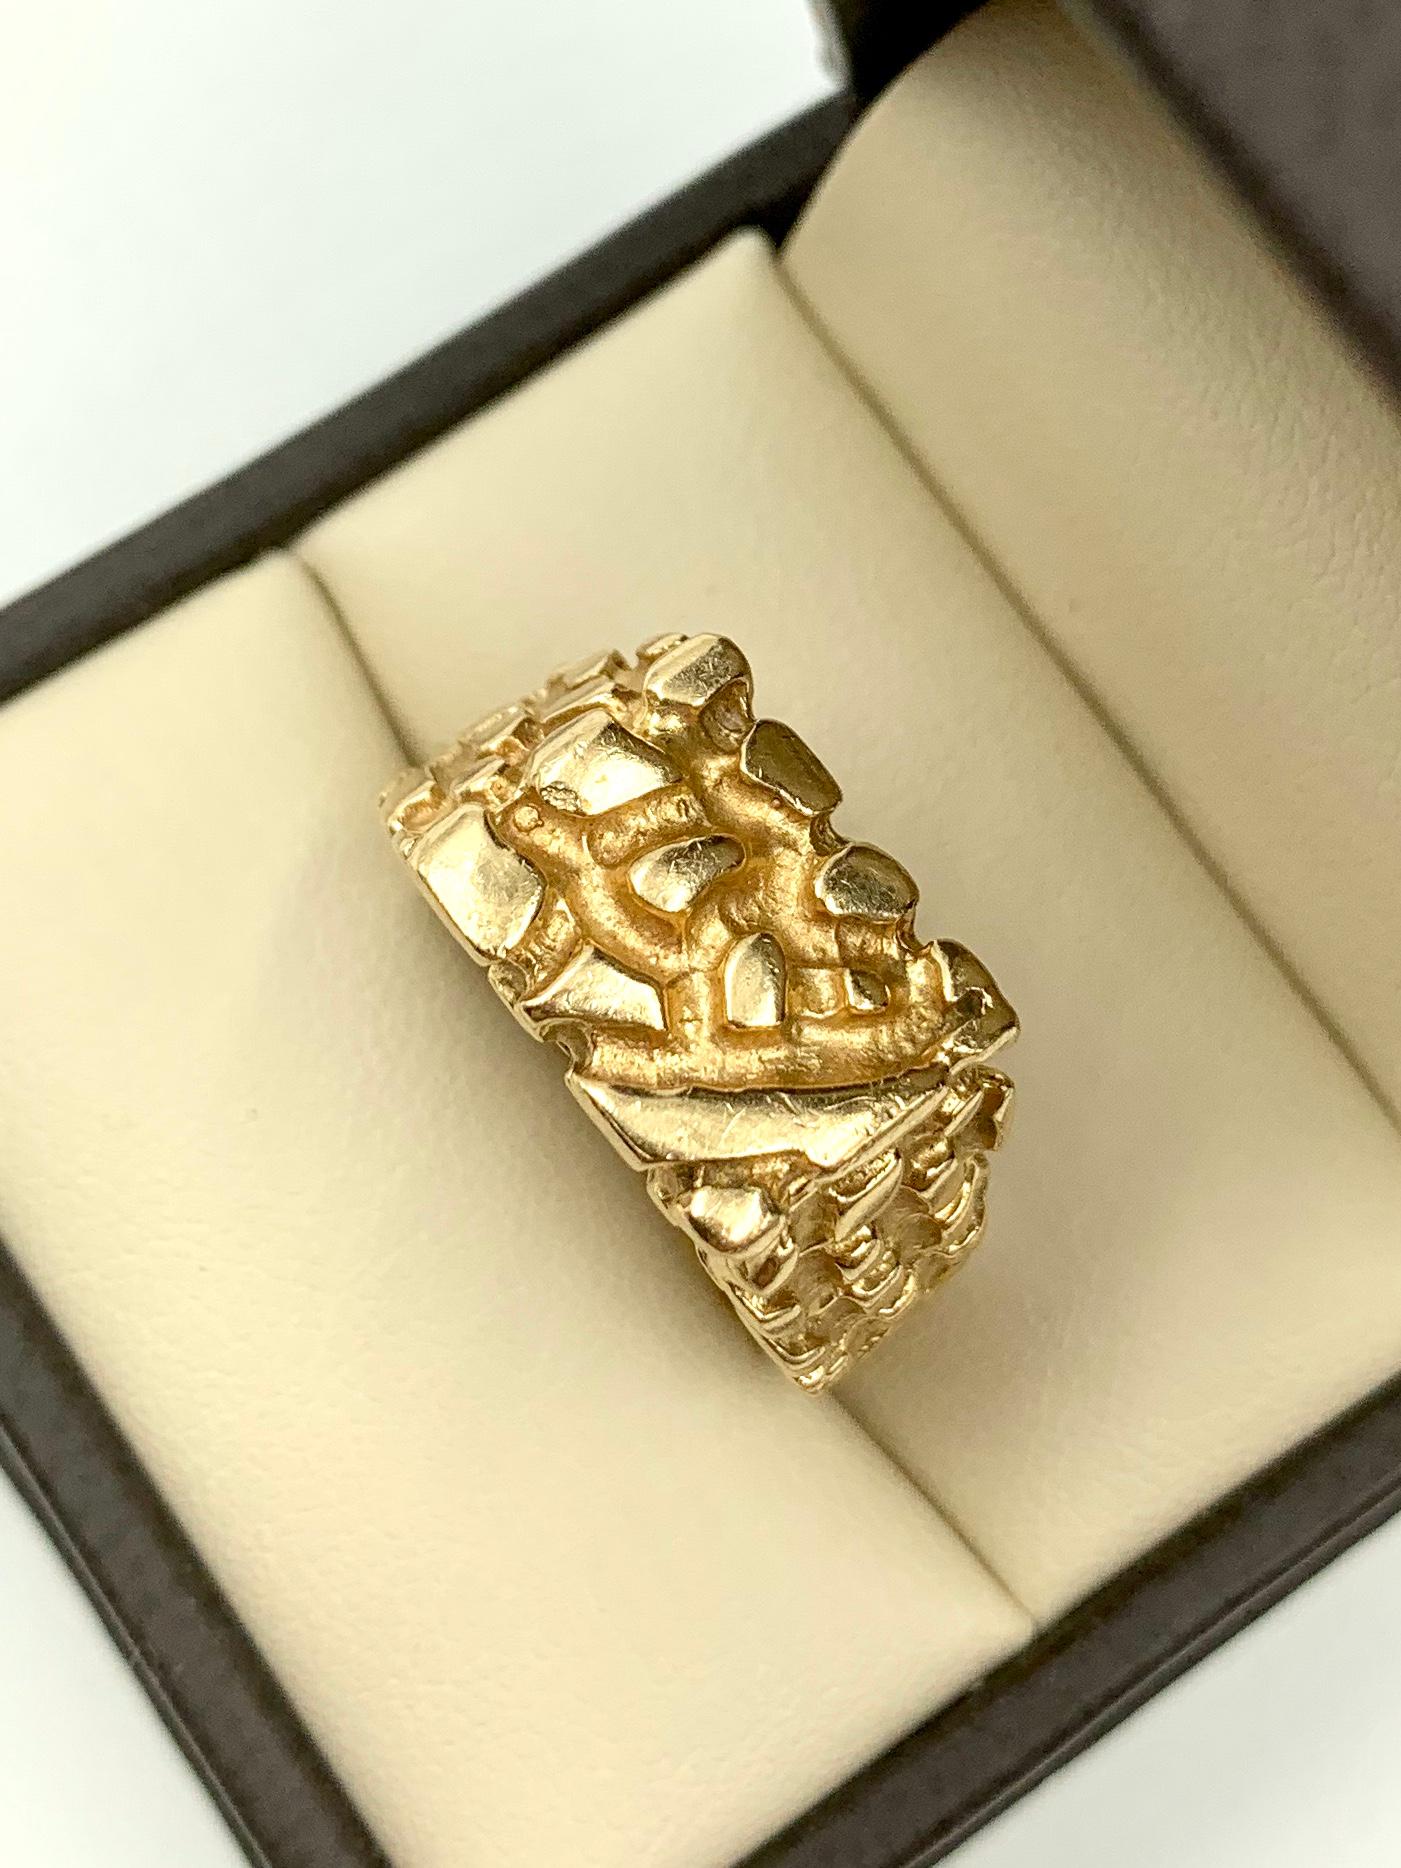 Estate signet style 14K yellow gold ring designed in the naturalistic gold nugget form.
20th Century
Substantial, solid gold unisex statement ring 
Condition: Very Good
Marks: 14K, makers mark
Size: 9 US
 